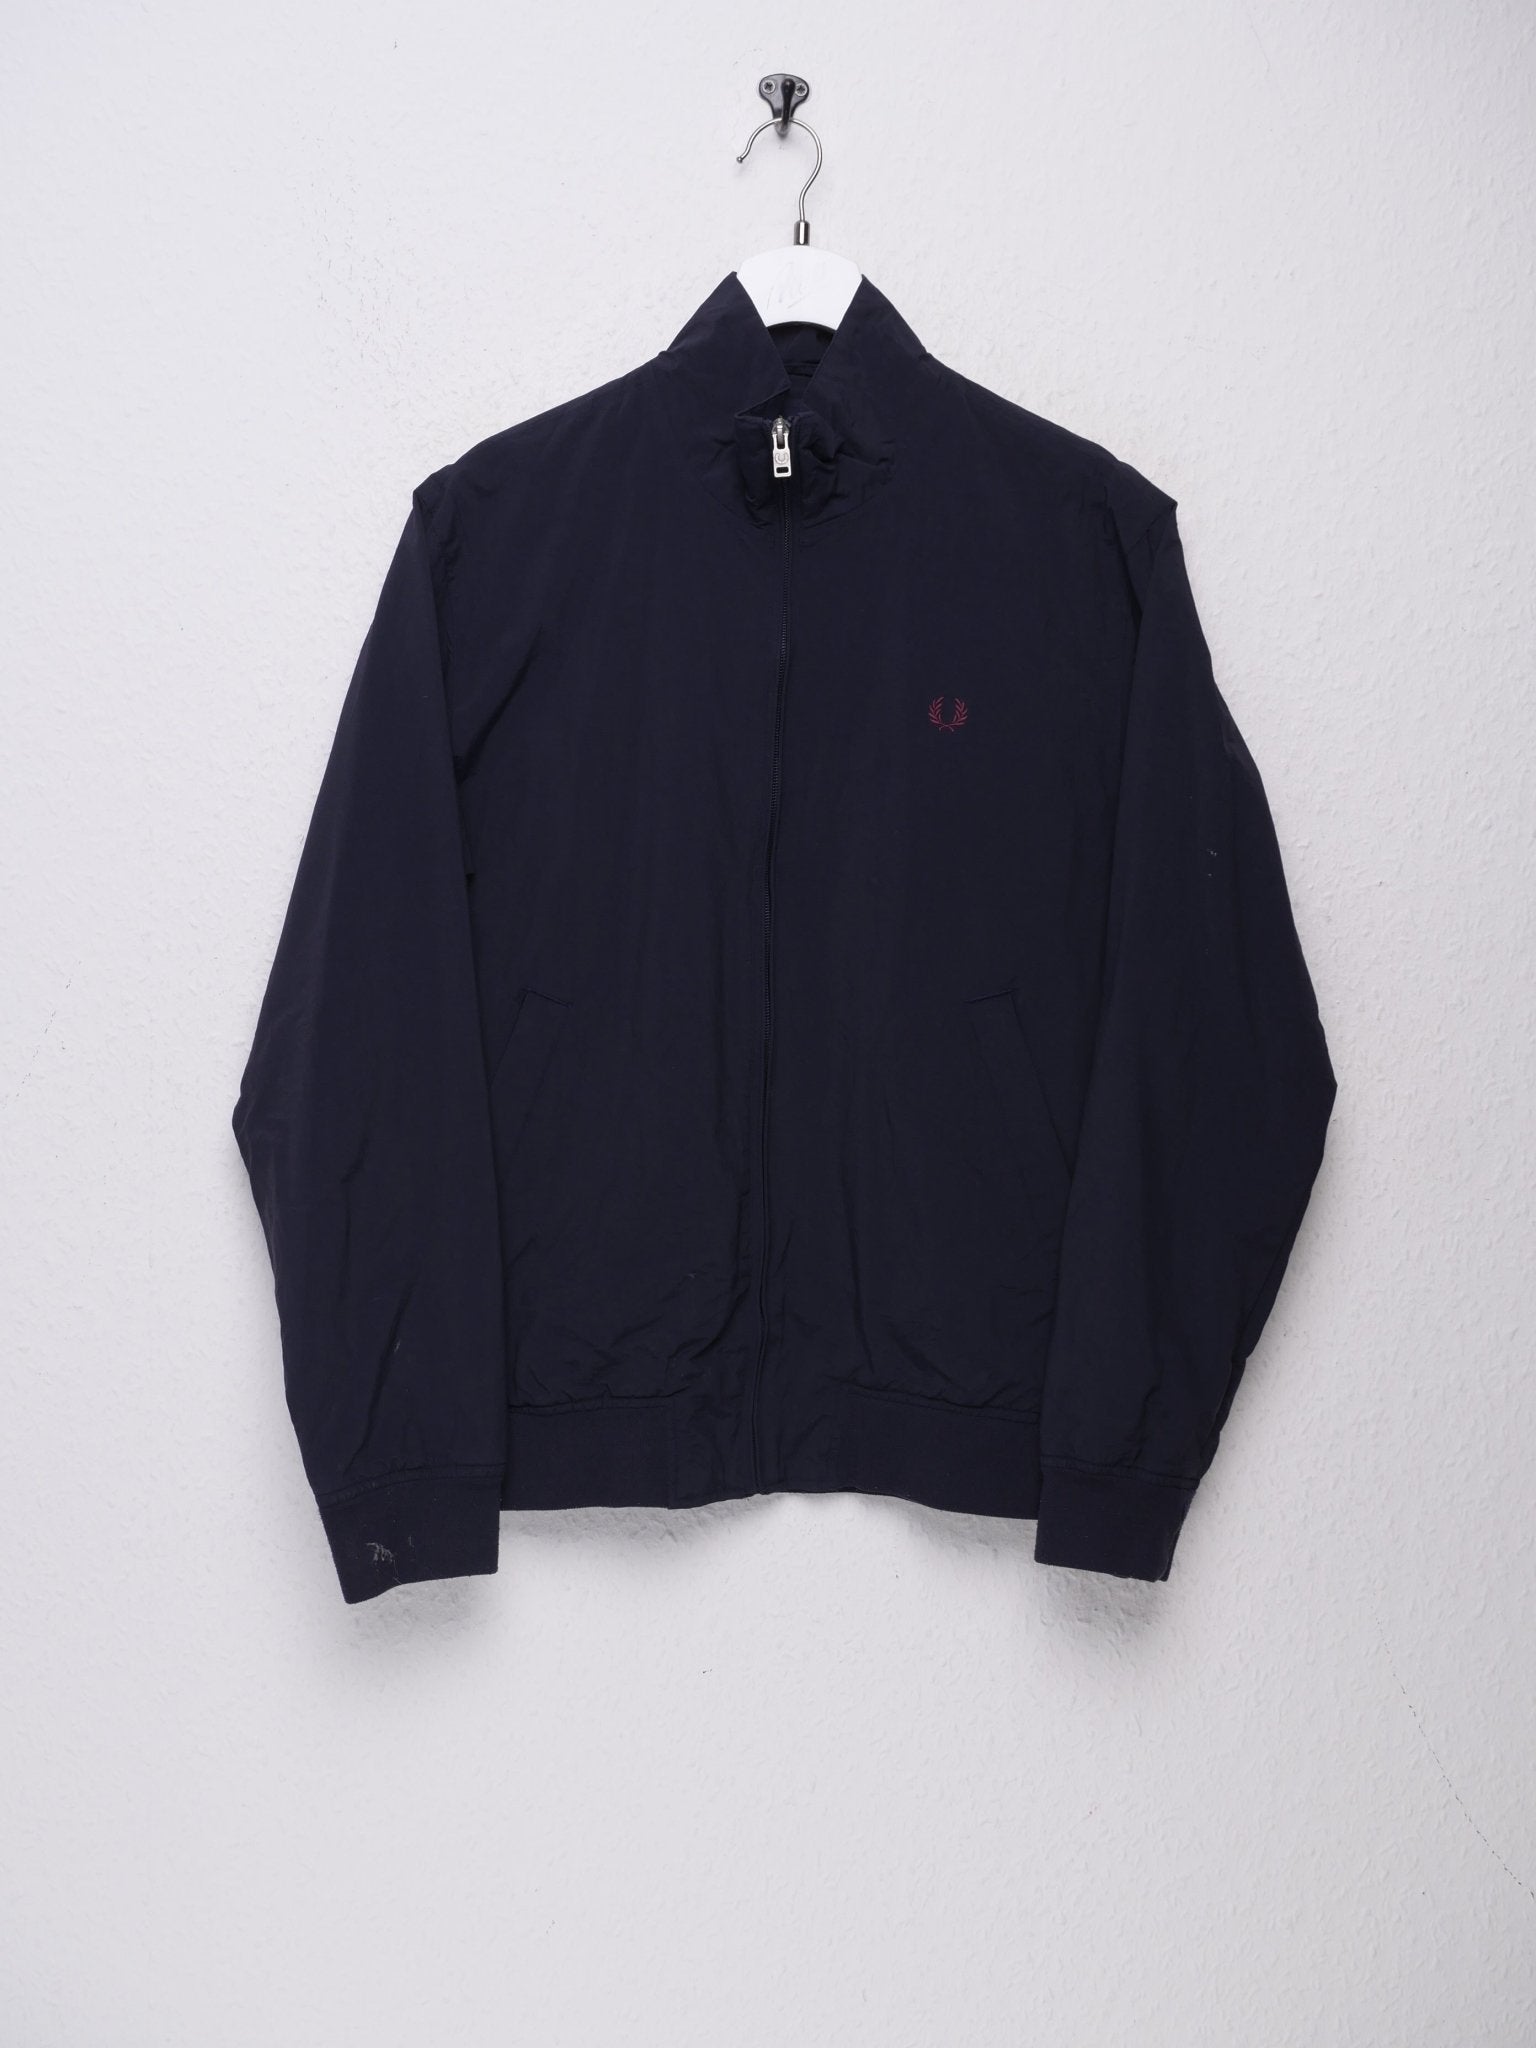 Chaps embroidered Logo navy Jacket - Peeces